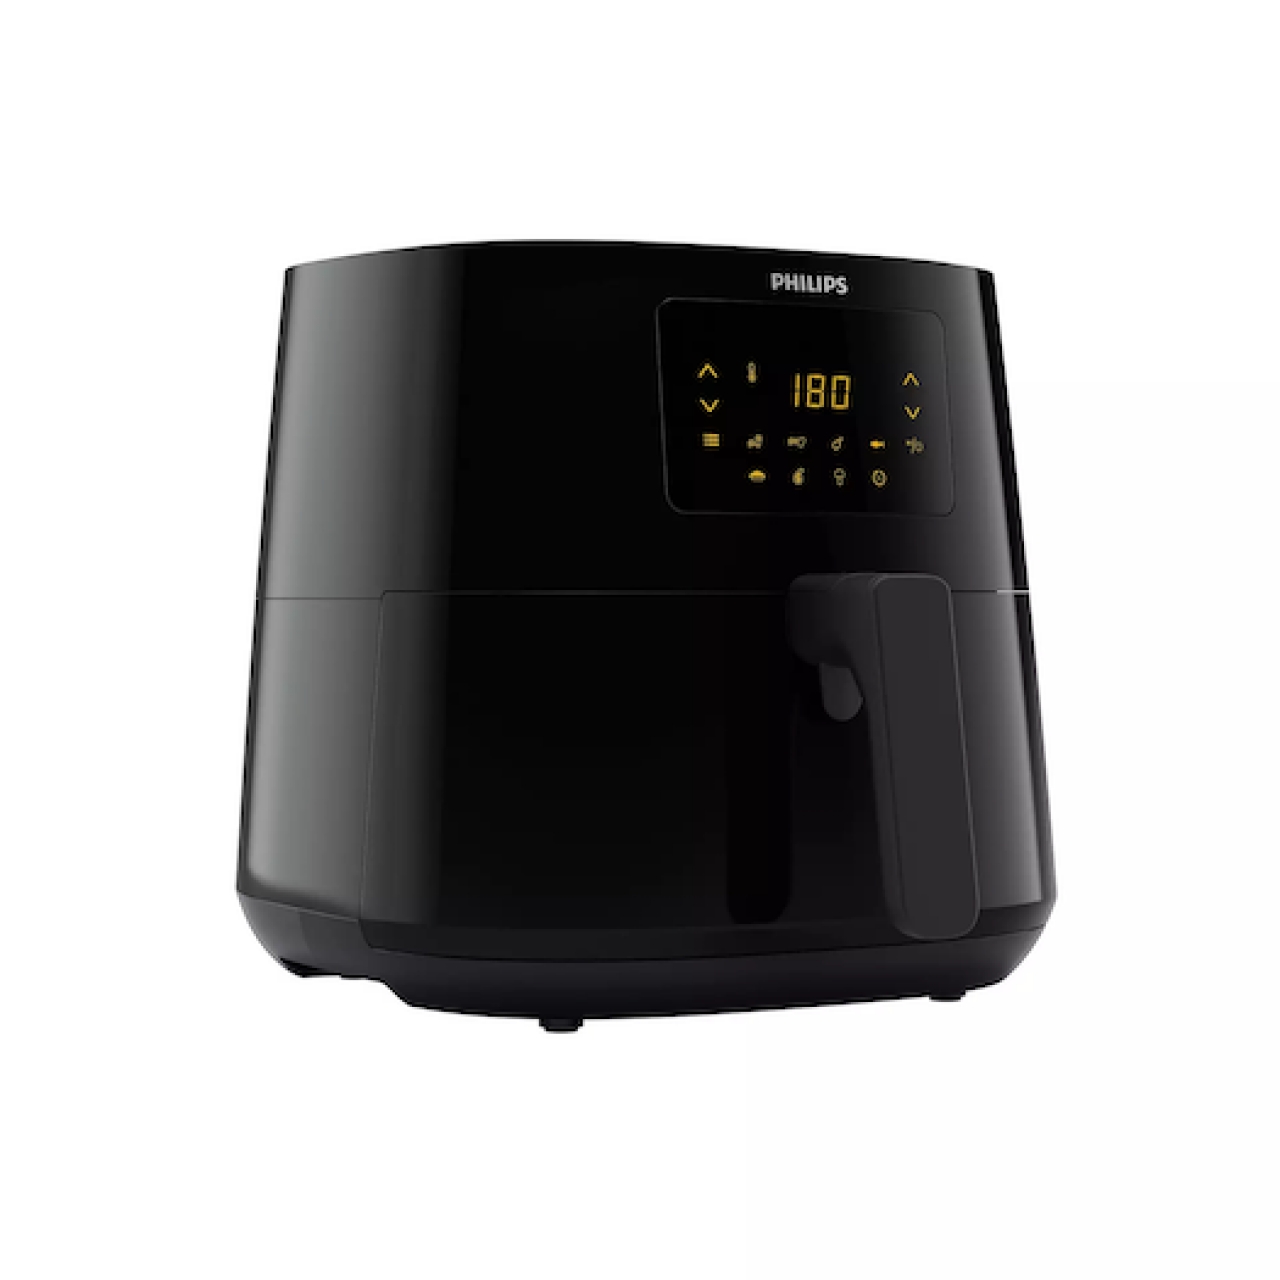 Philips Airfryer Essential Collection XL